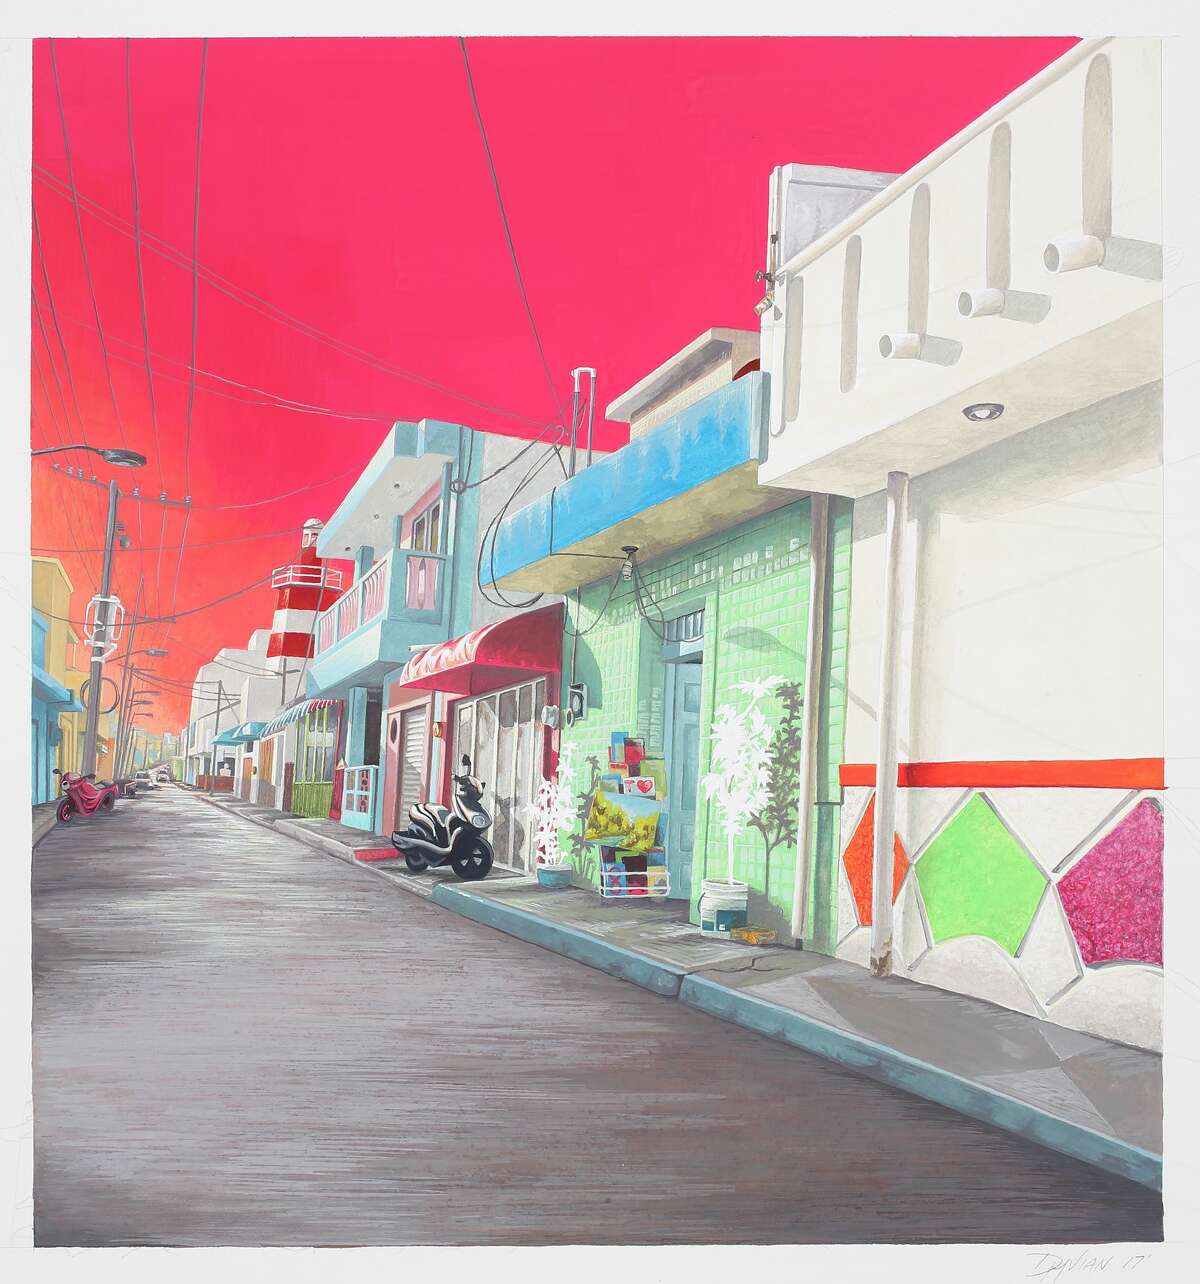  "#Isla Mujeres" by Duvian Montoya. His work will be shown alongside his mentor's in “Robert Cottingham and Duvian Montoya: A Glossary of Painting” on display at the ADK House in Norwalk Sept. 16 through Oct. 21.